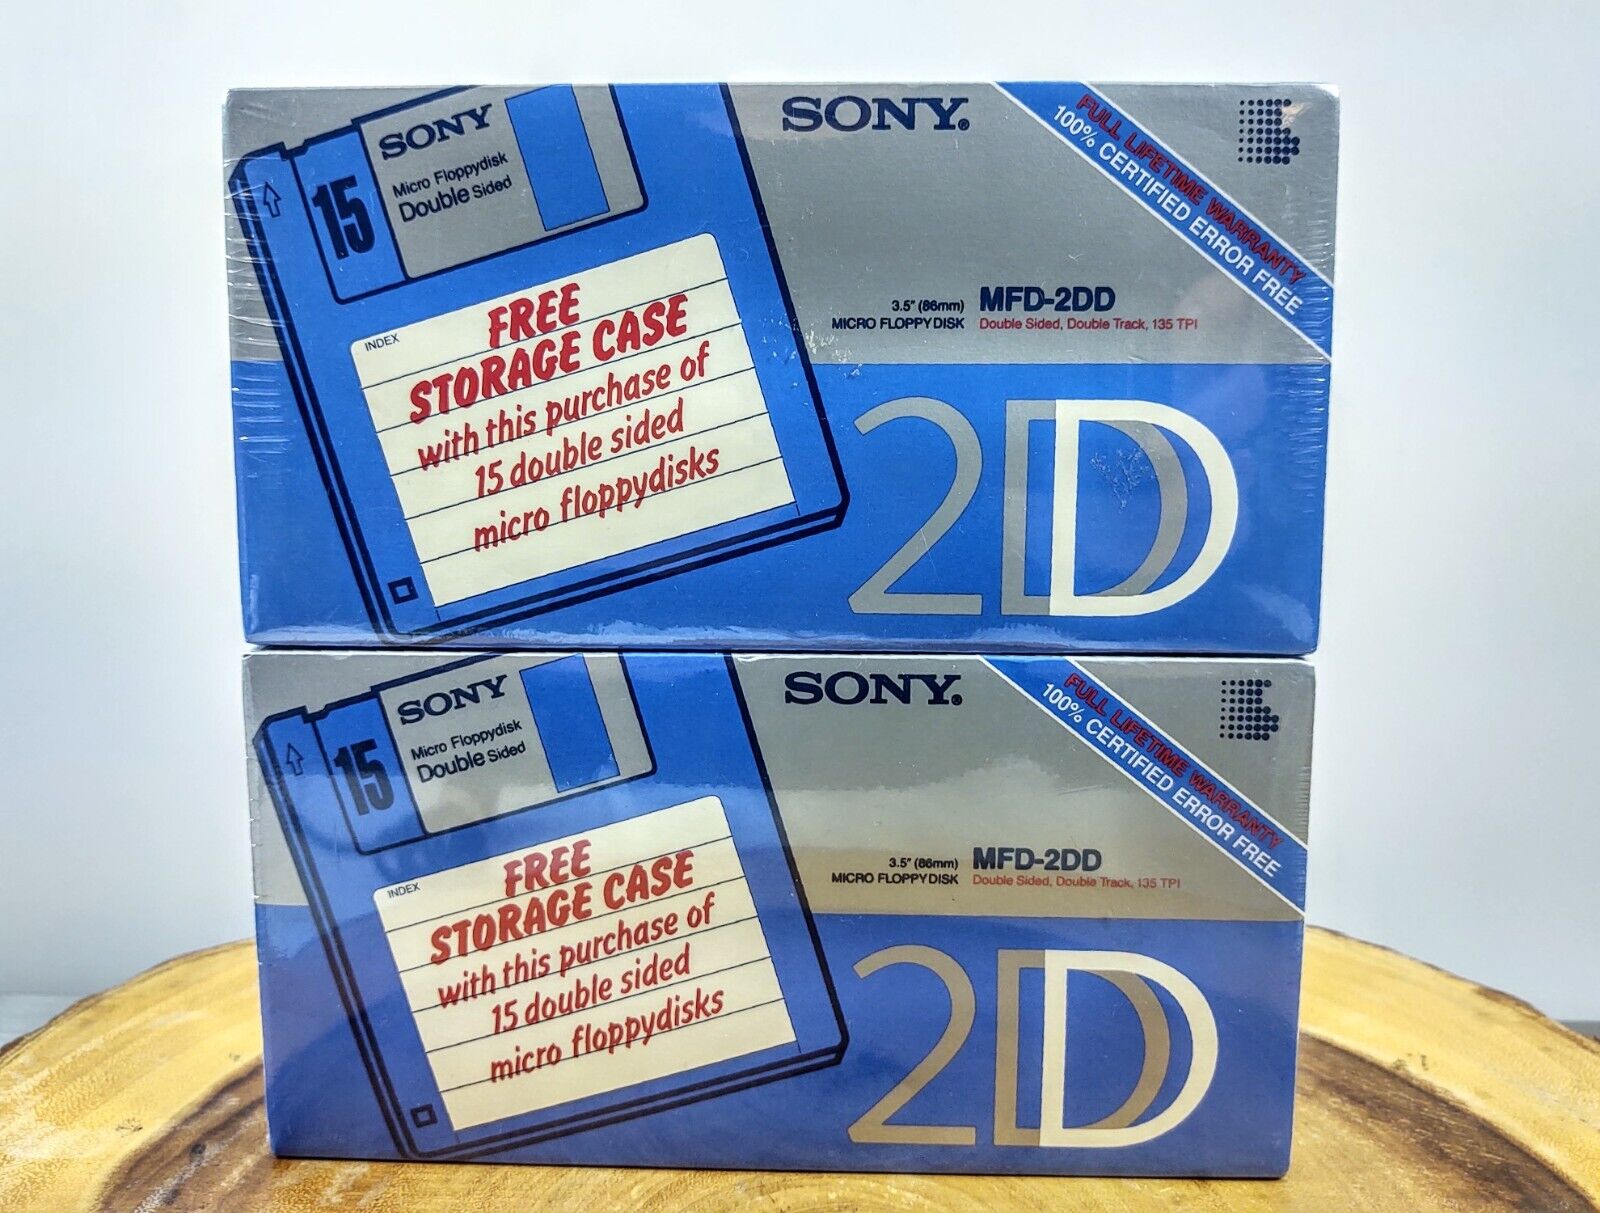 (2 Packs) 15 Sony 2HD MFD-2DD  HD 3.5 inch Diskettes New Sealed = 30 Diskettes